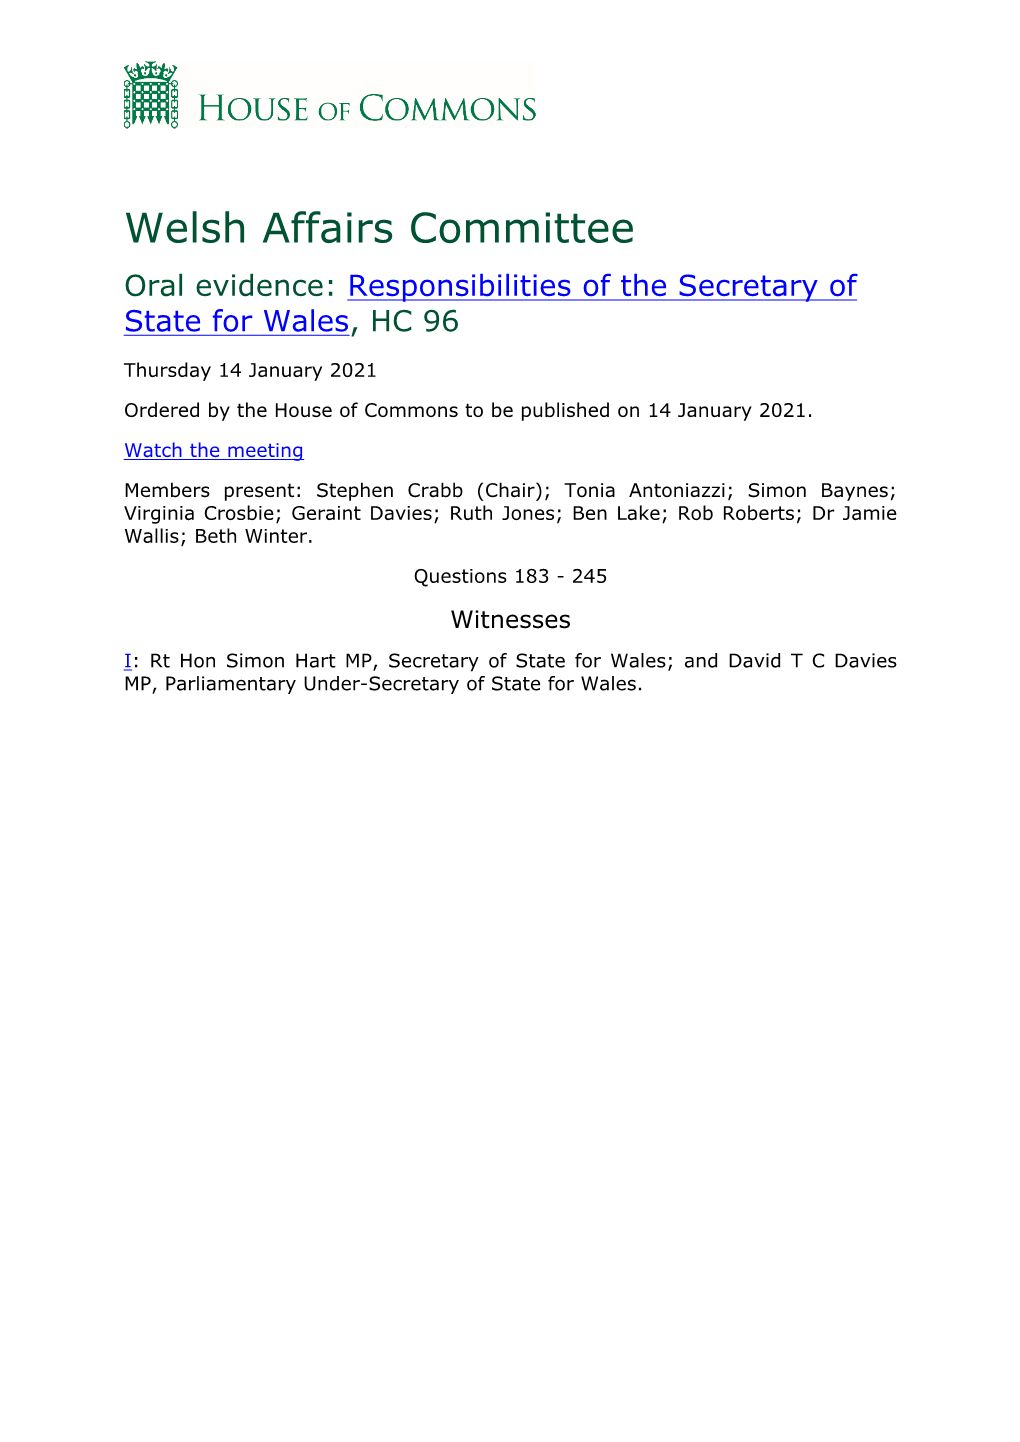 Welsh Affairs Committee Oral Evidence: Responsibilities of the Secretary of State for Wales, HC 96